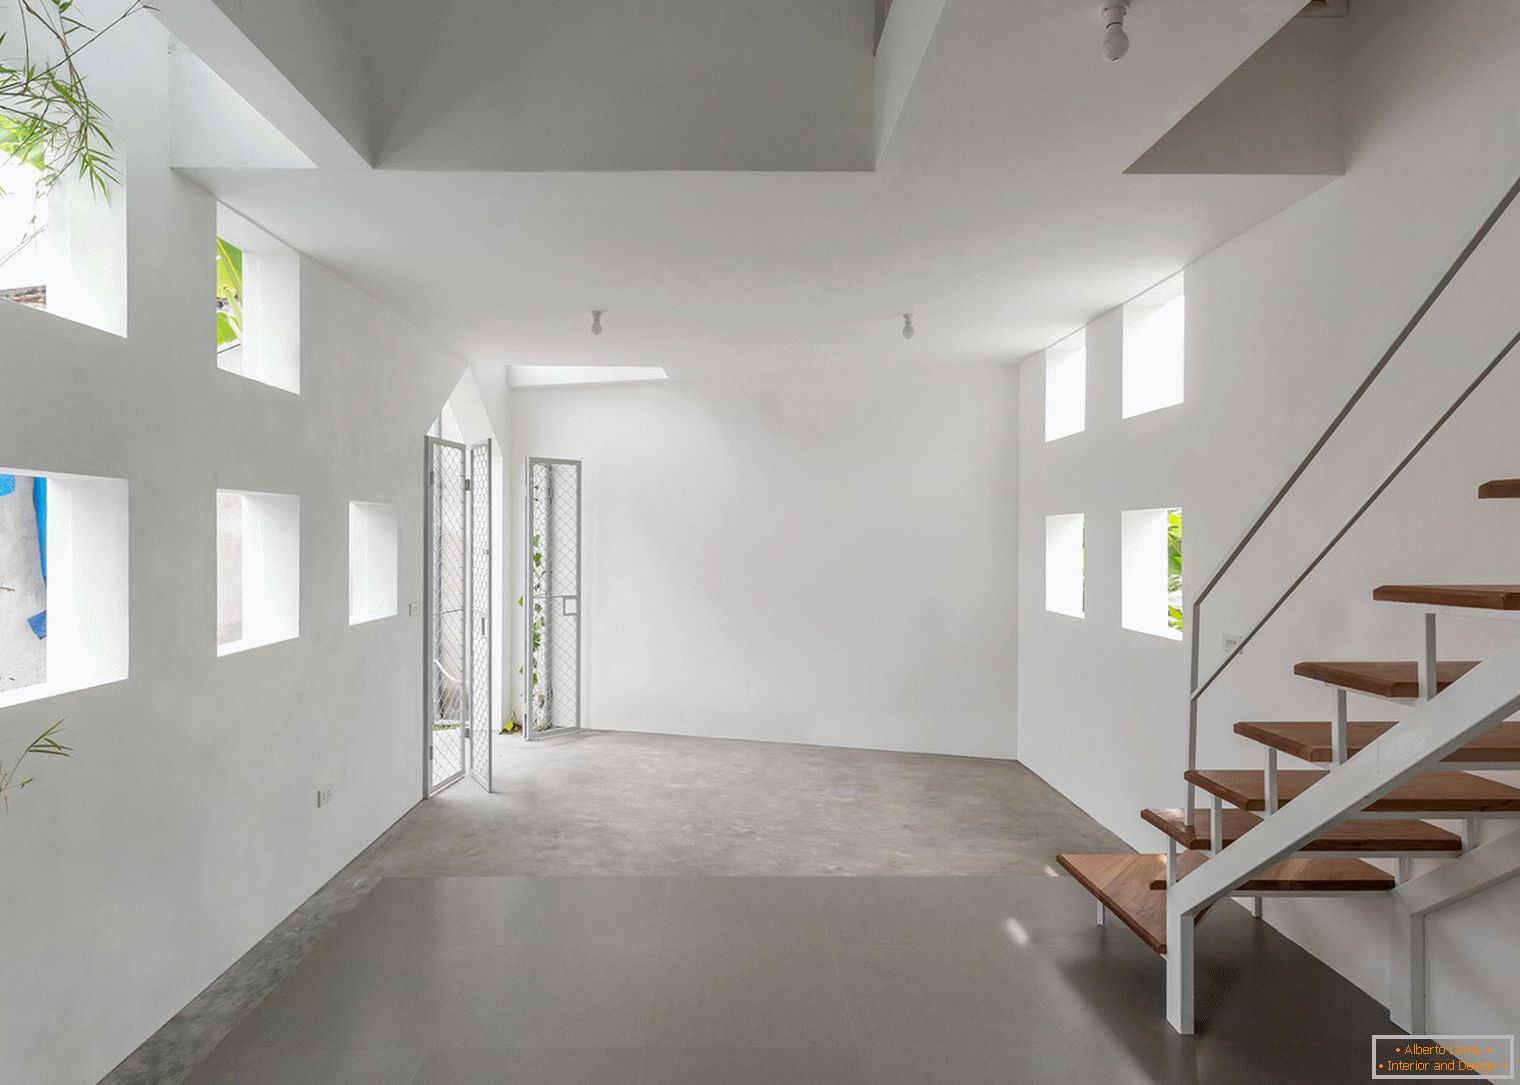 Hall in a narrow concrete house